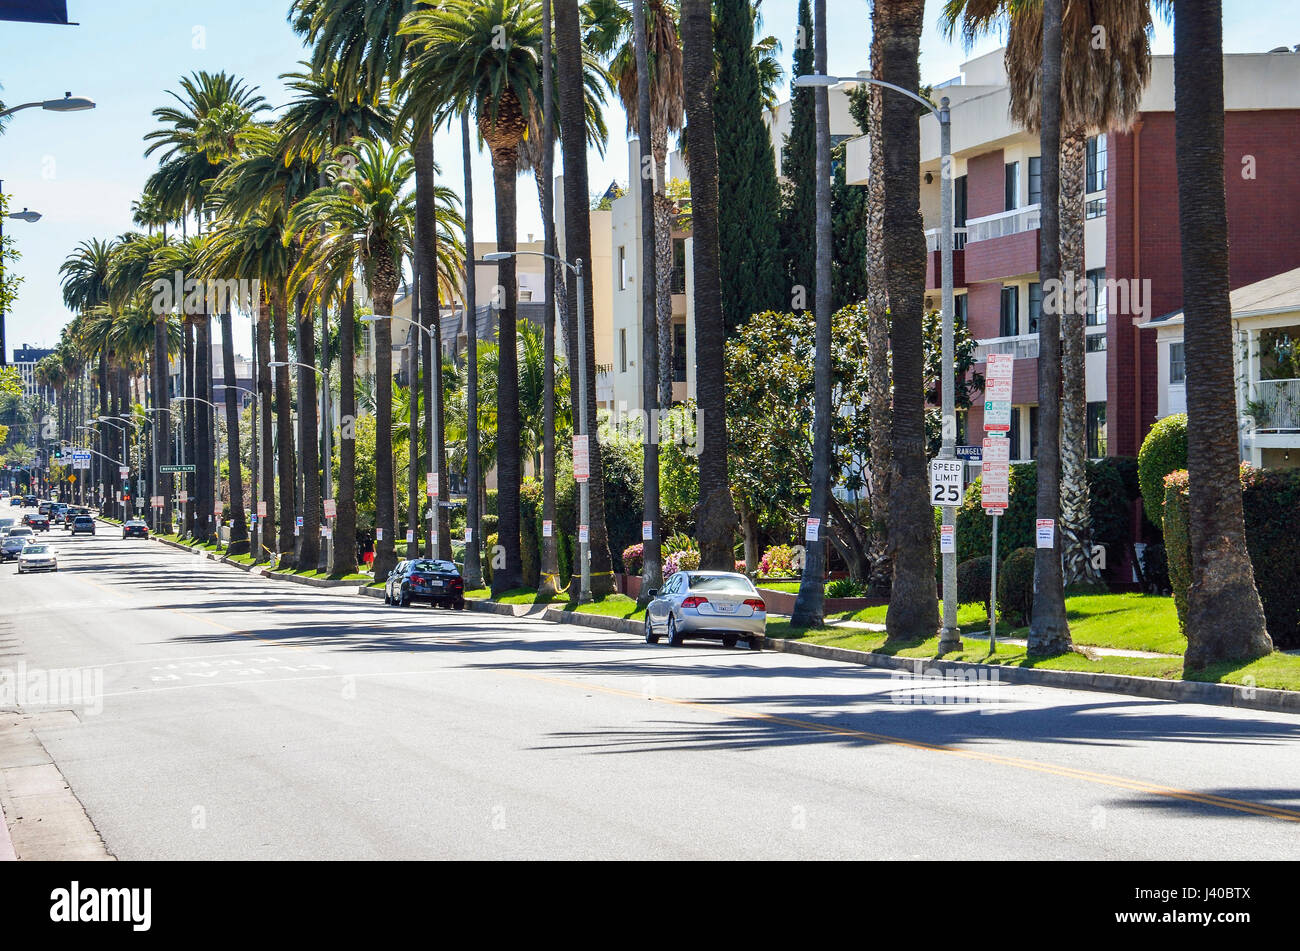 Los Angeles, USA - March 9, 2014: Rangely Beverly street in downtown LA with residential houses and palm trees Stock Photo